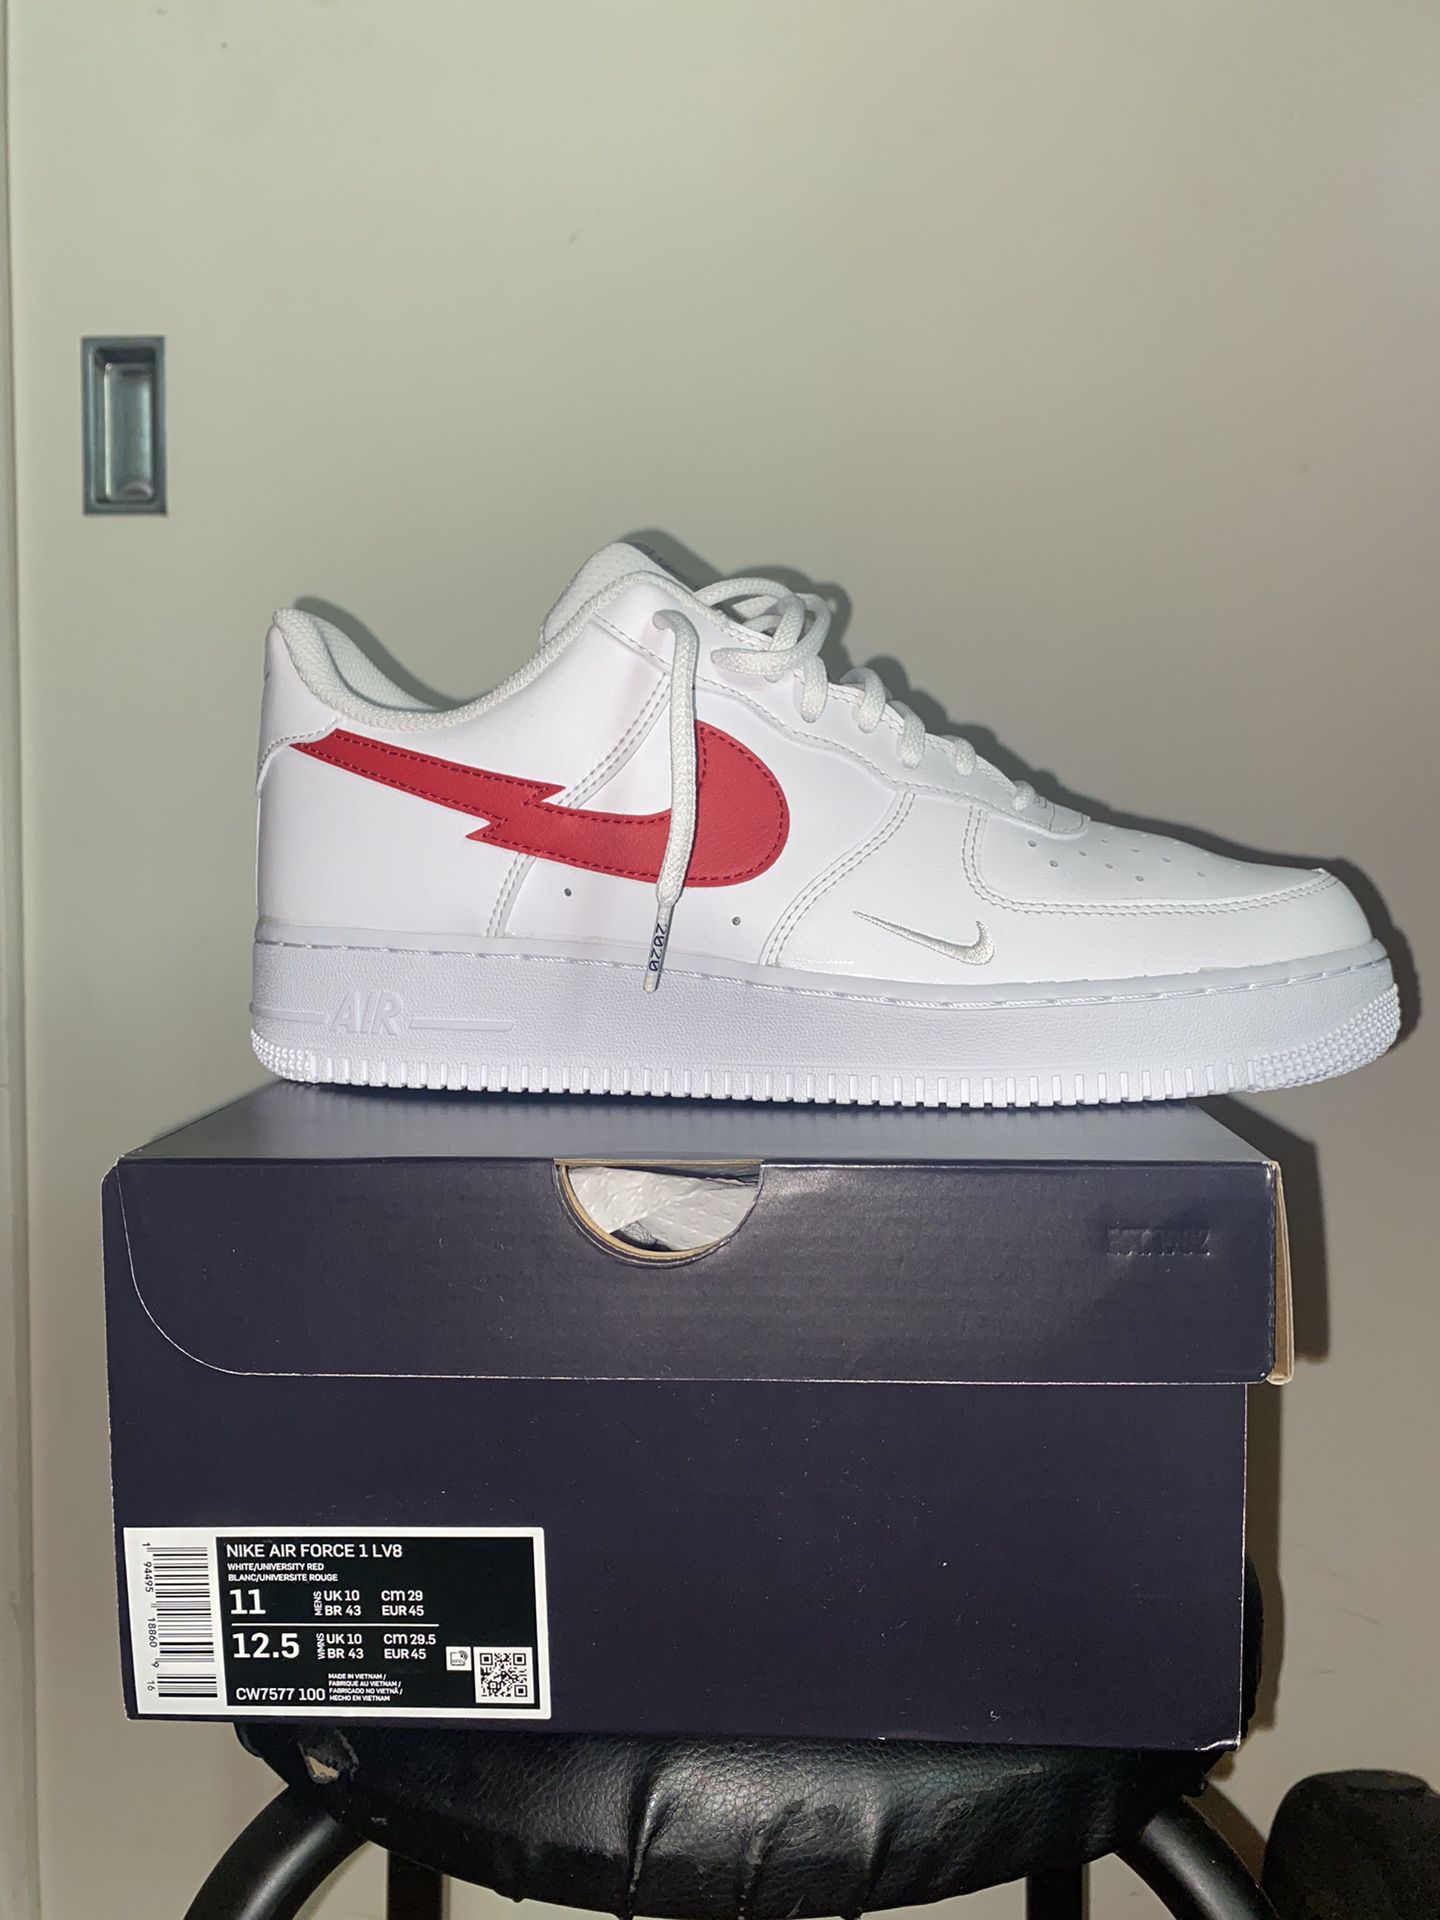 Omgeving jukbeen schrijven Nike Air Force 1 Low Euro Tour (2020) for Sale in Los Angeles, CA - OfferUp